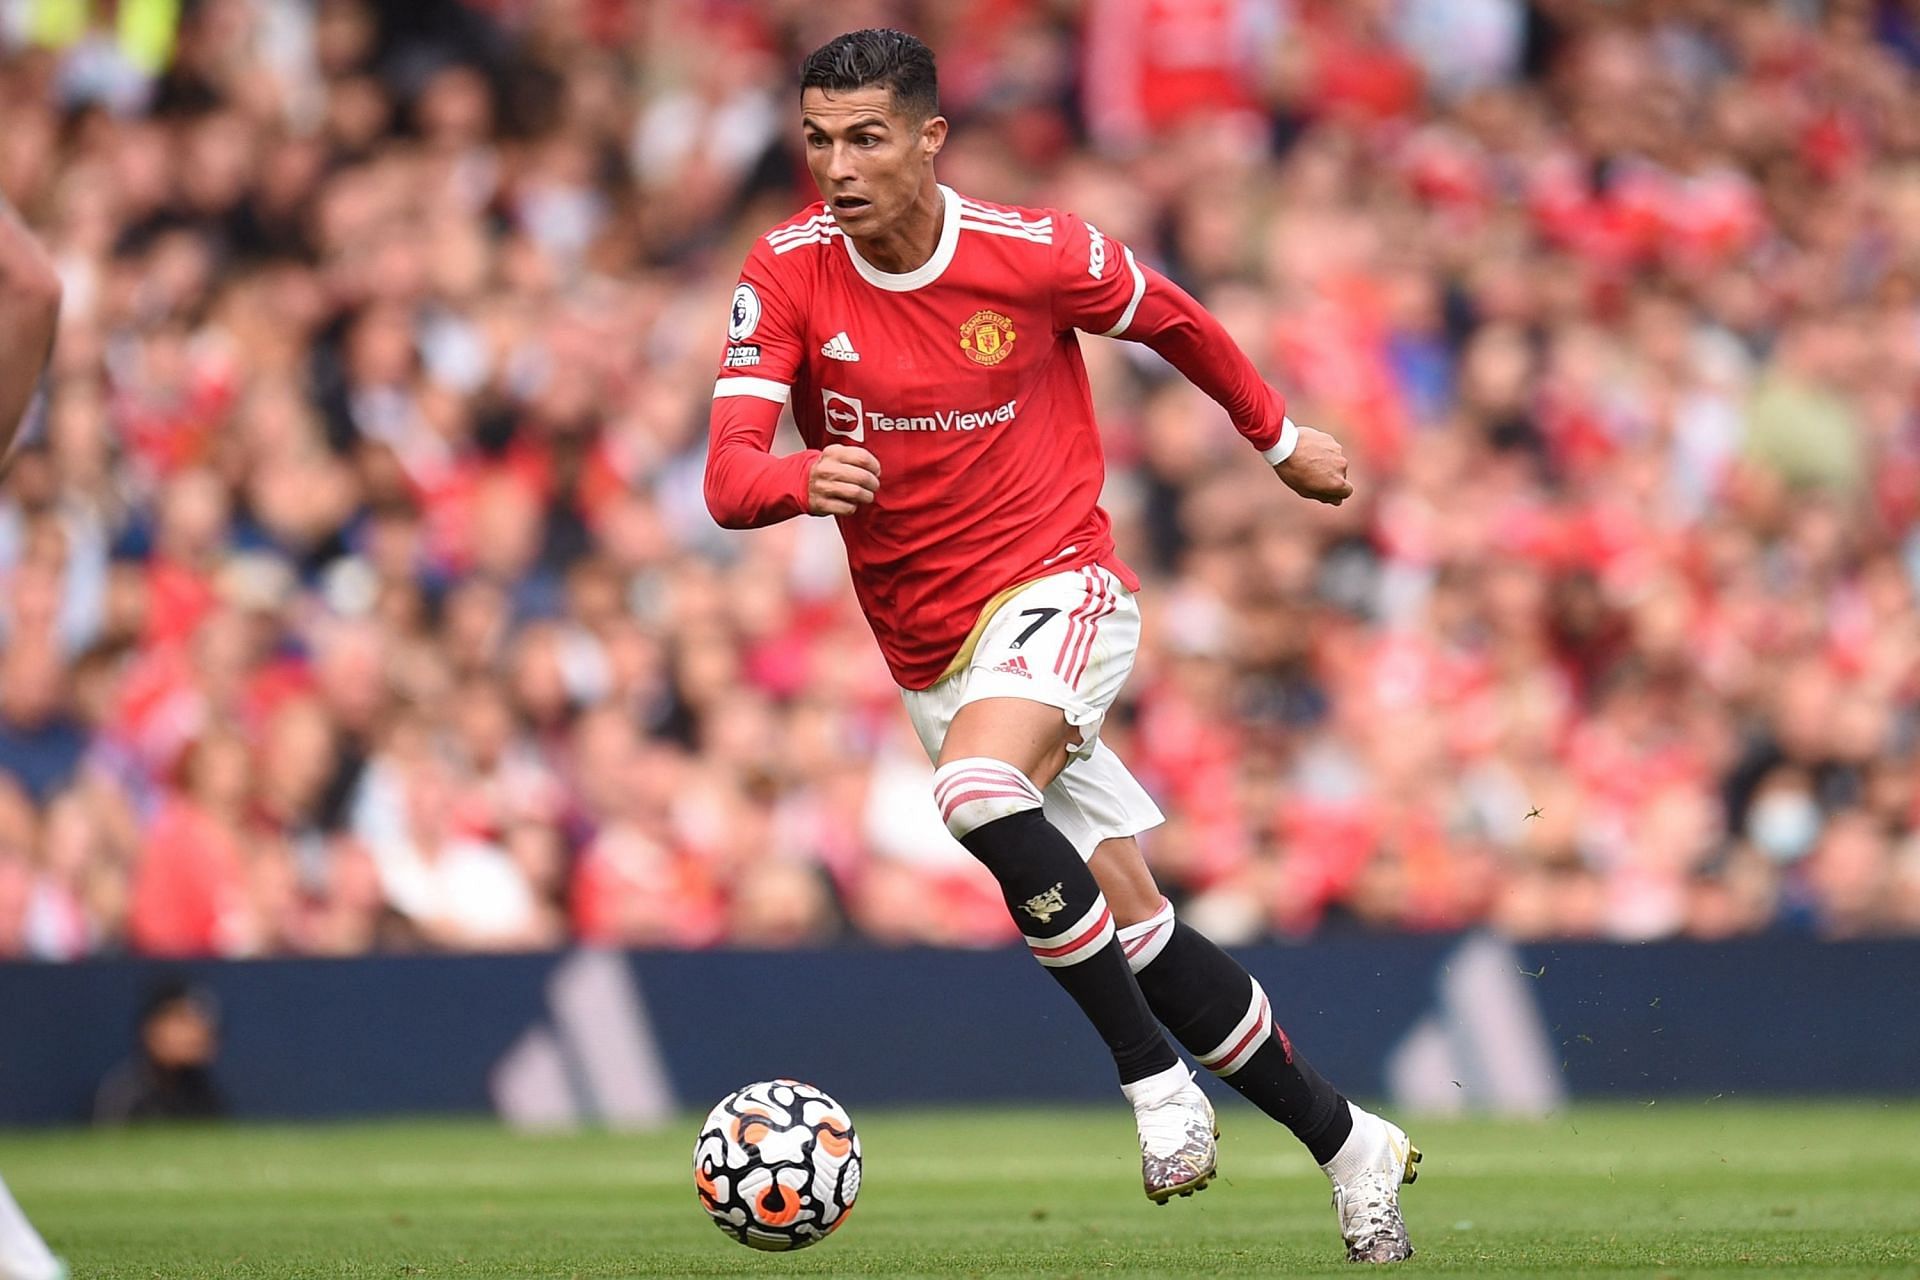 Ronaldo has struck 10 times for United his returning to the side